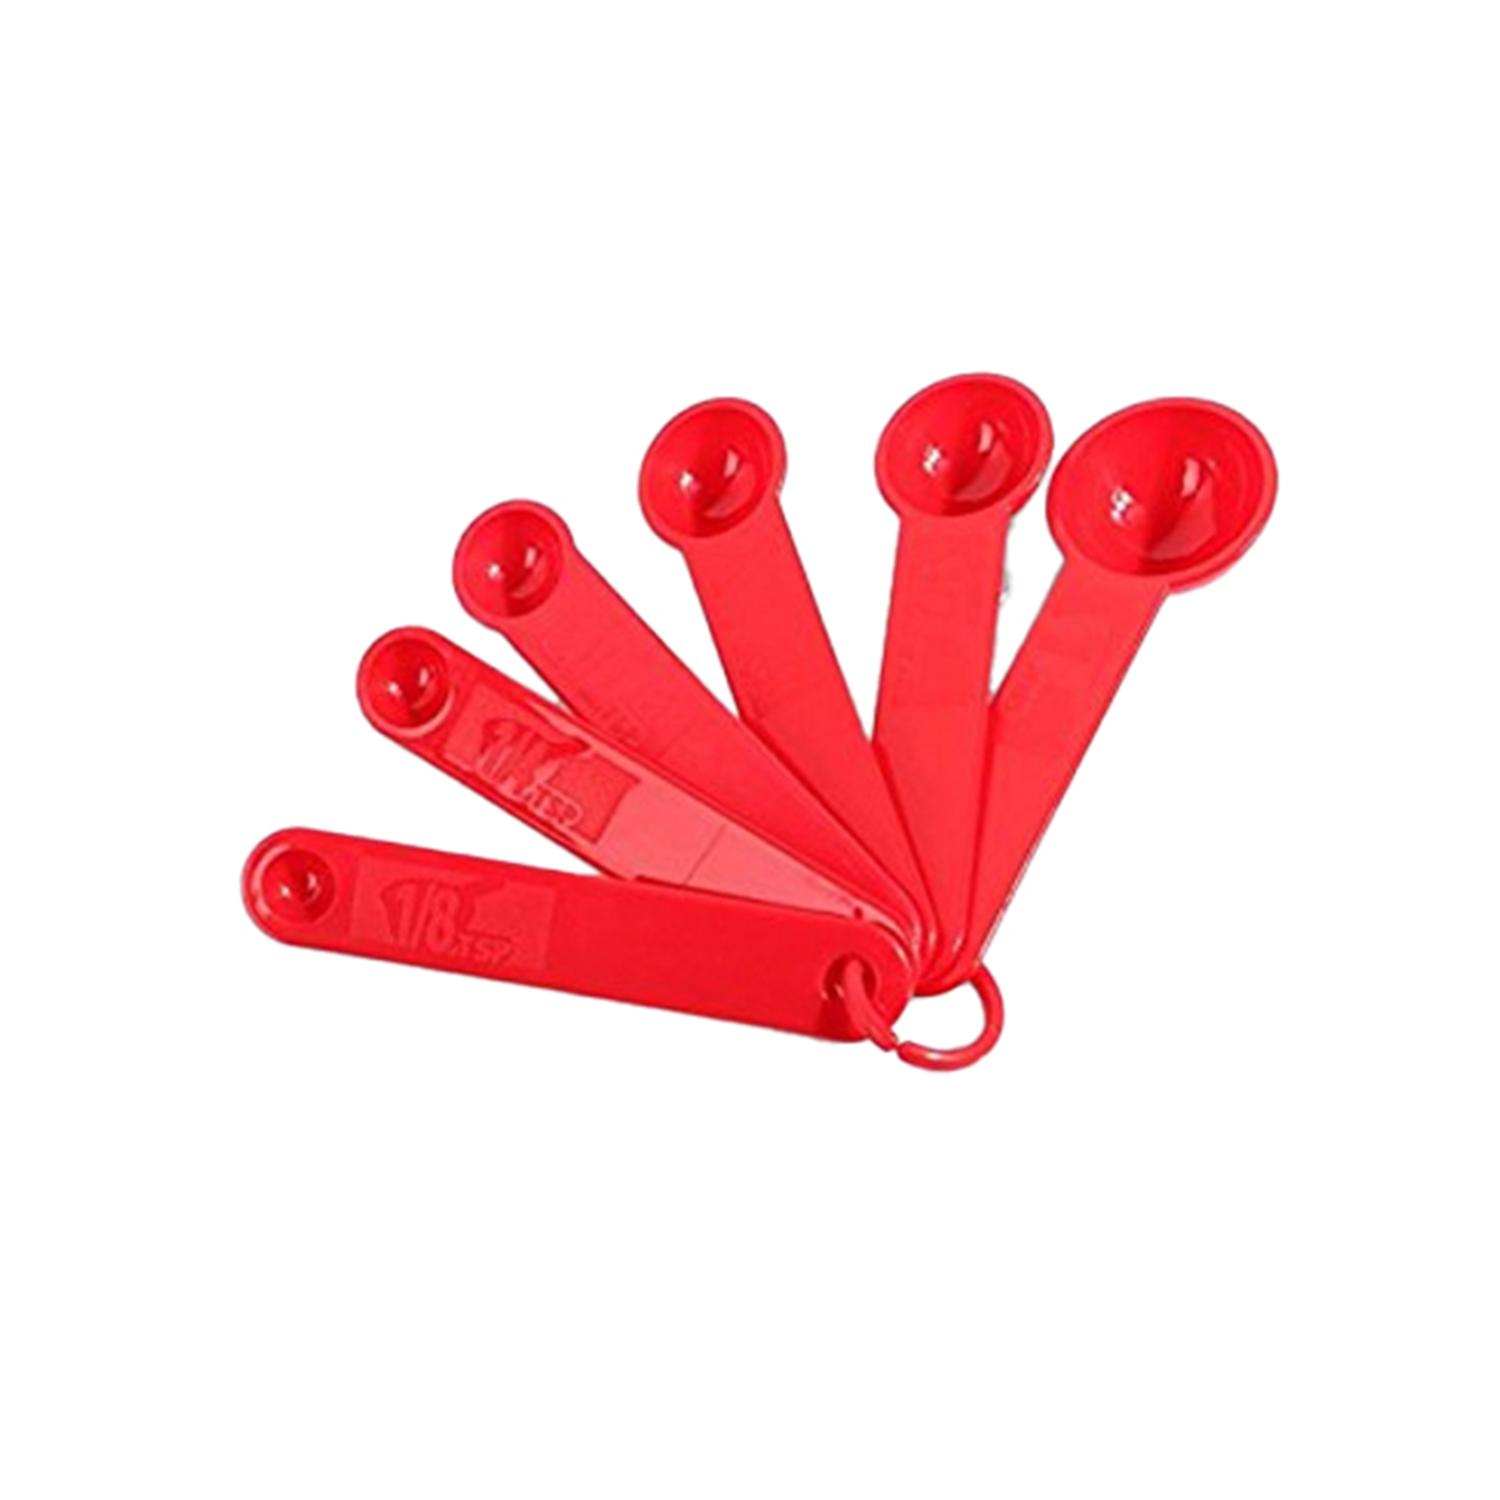 RED MEASURING SPOONS 6PCS